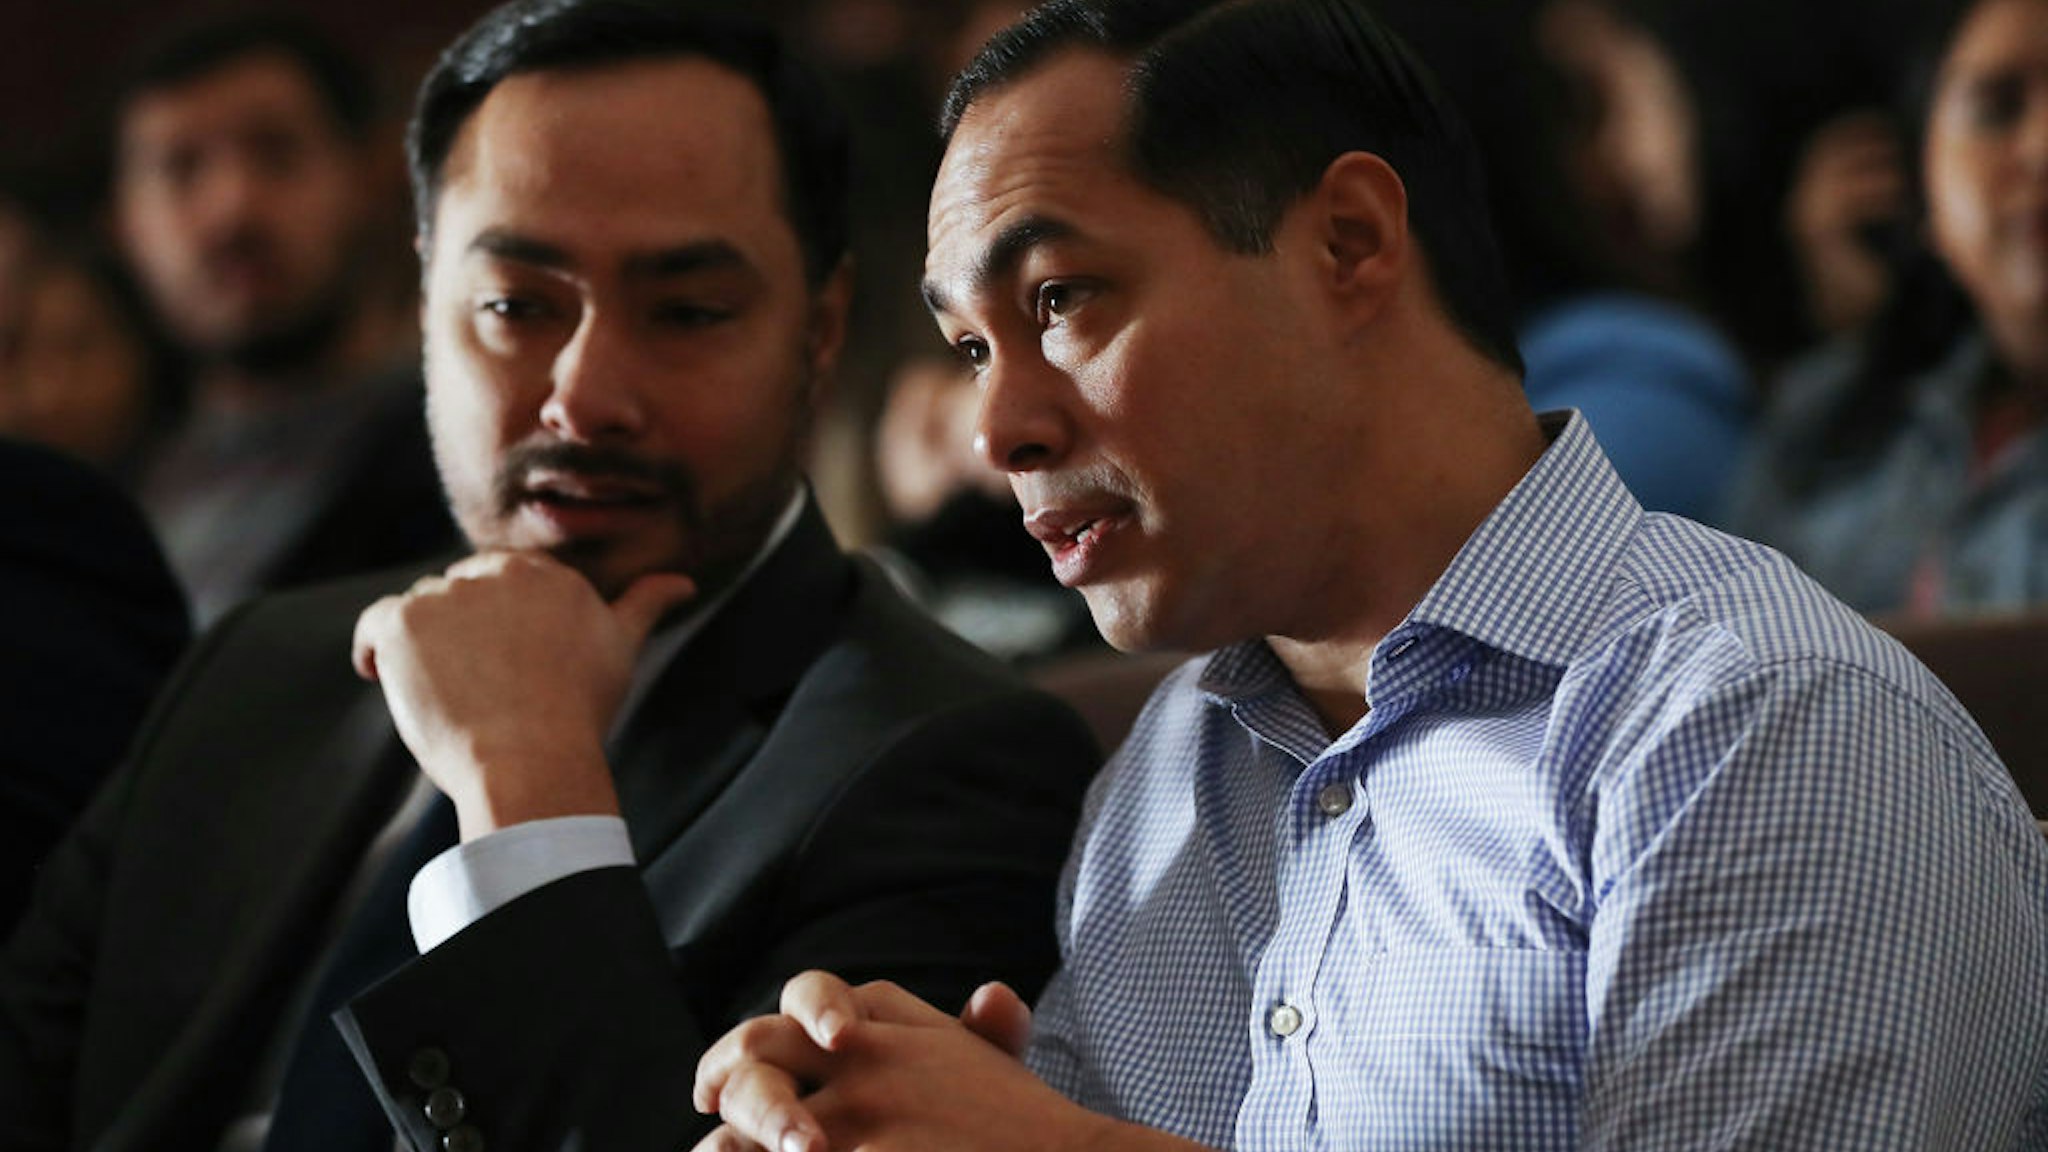 BELL GARDENS, CALIFORNIA - MARCH 04: Democratic presidential candidate Julian Castro (R) and his twin brother U.S. Rep. Joaquin Castro (D-TX) sit at a campaign appearance at Bell Gardens High School, in Los Angeles county, on March 4, 2019 in Bell Gardens, California. Castro, who served as Secretary of Housing and Urban Development (HUD) under President Barack Obama, is aiming to become the country's first Latino president. (